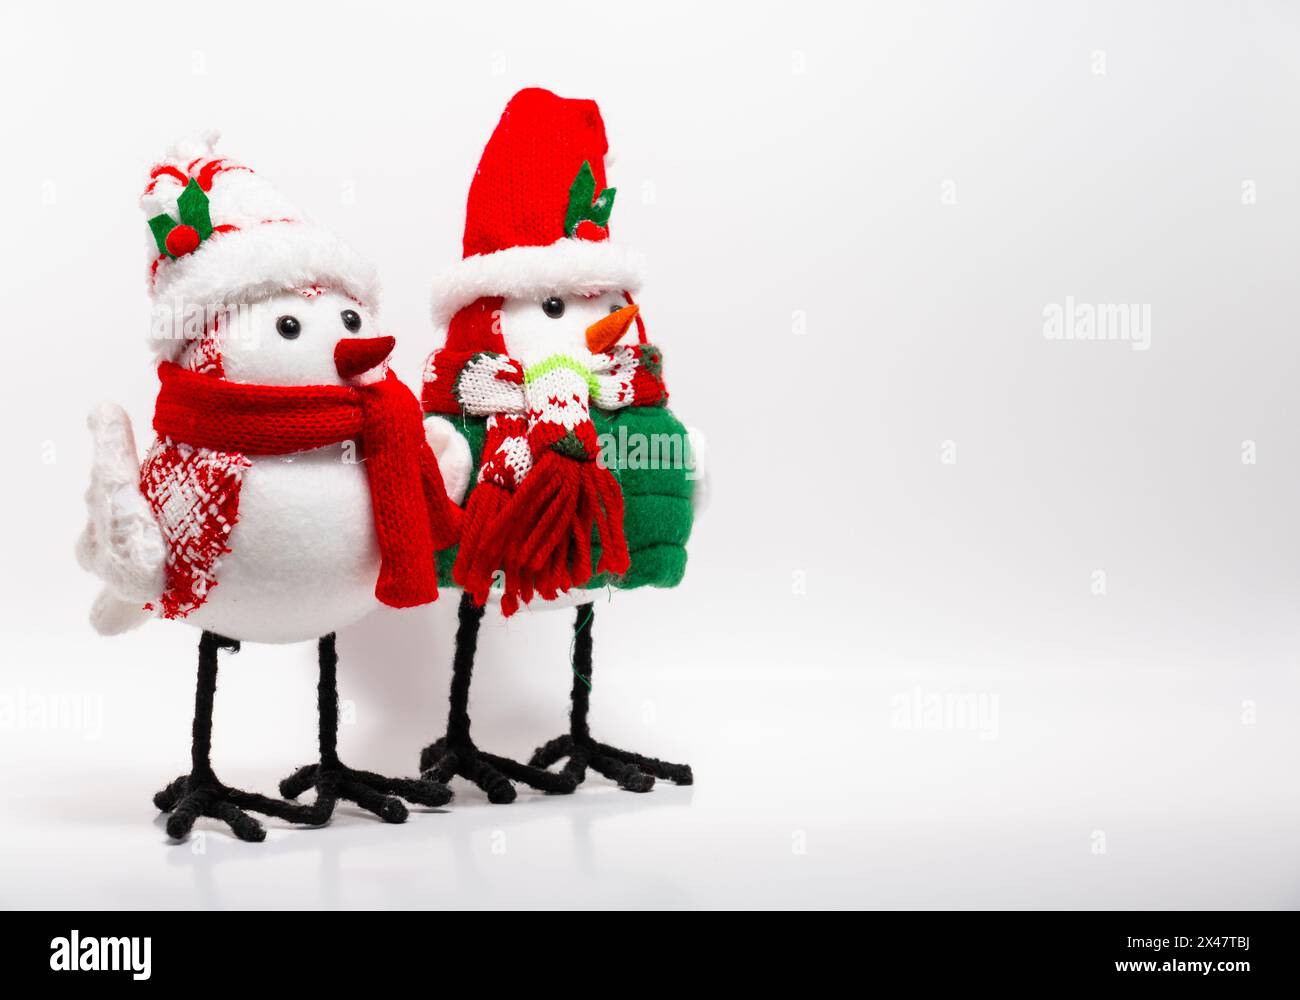 two handcrafted bird Christmas holiday yule decorations wearing scarves winter white background with negative space Stock Photo